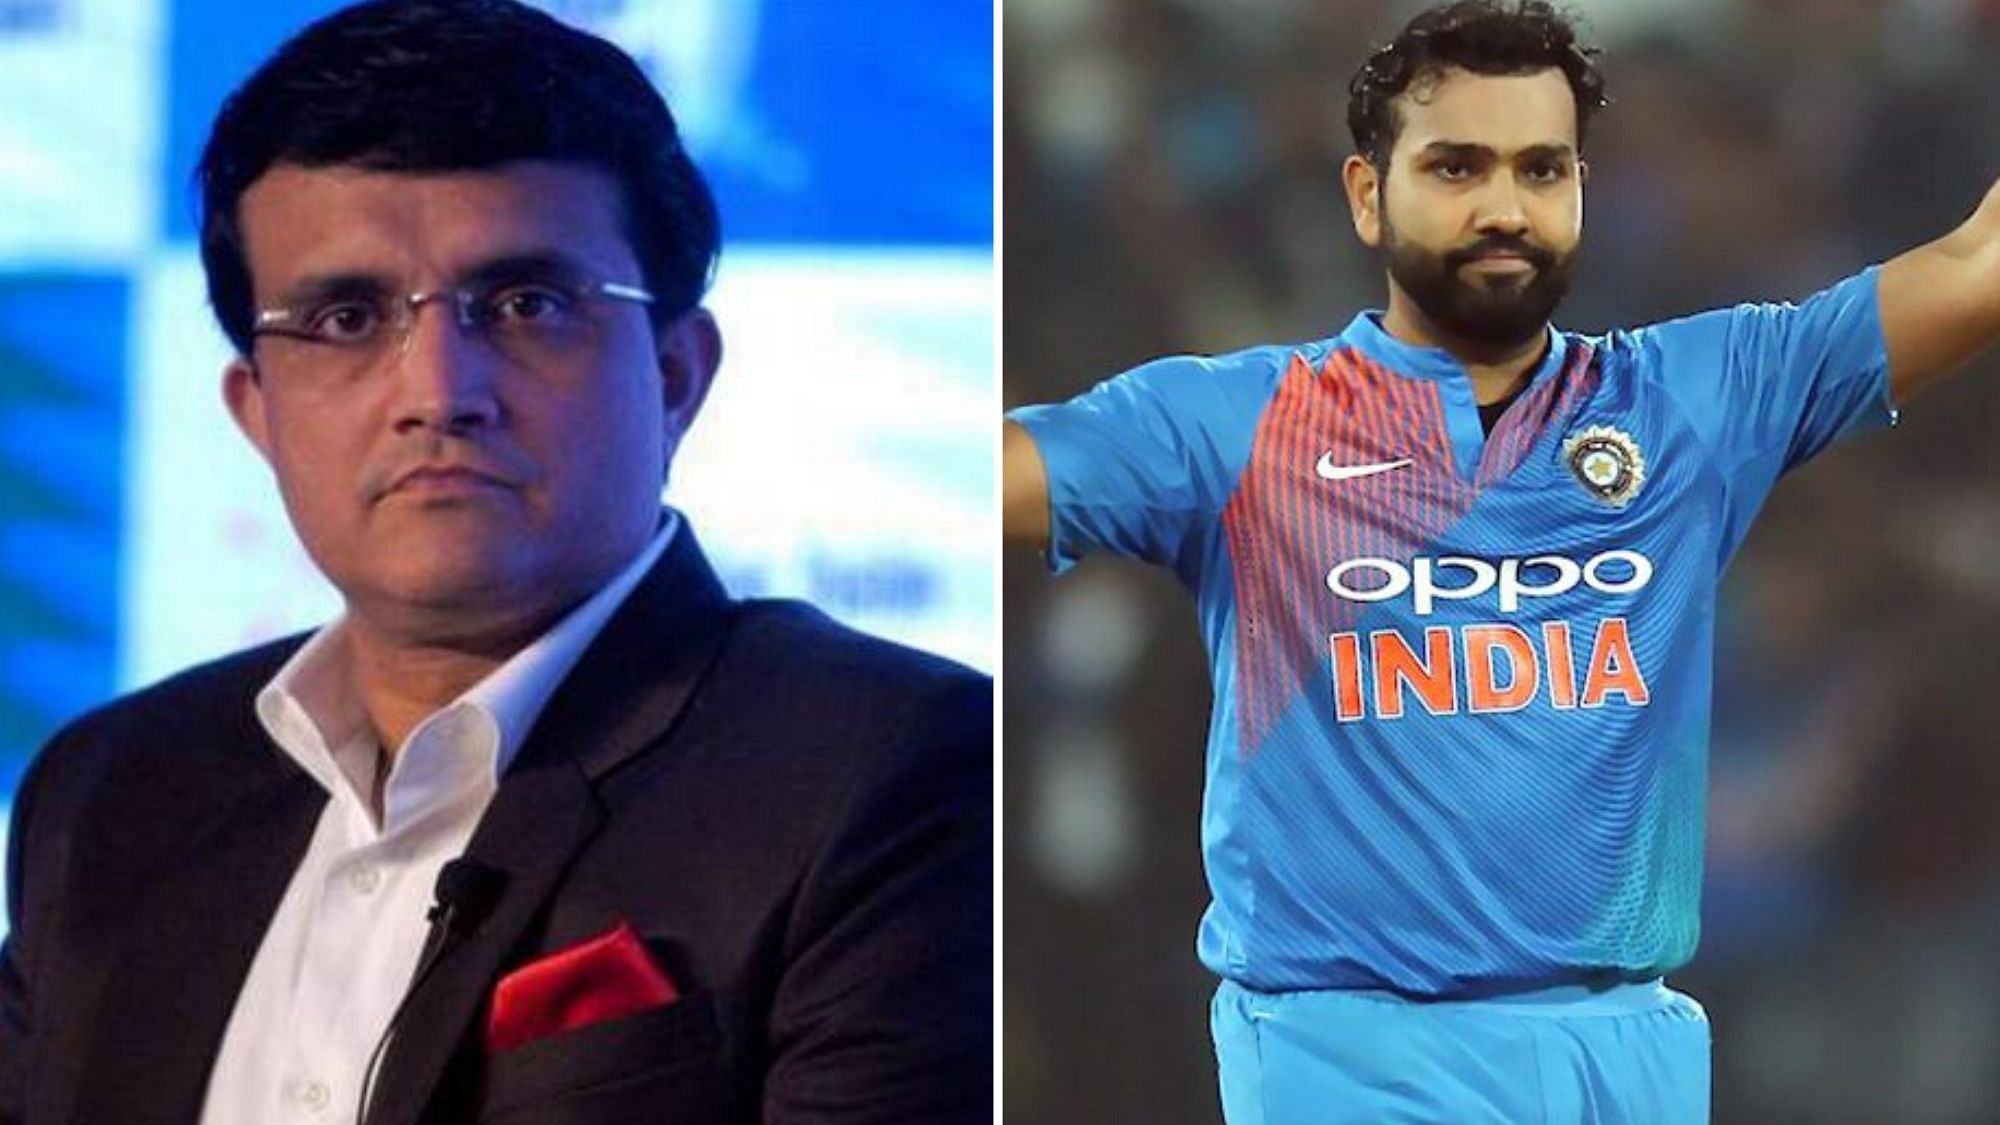 File photo of Sourav Ganguly (L) and Rohit Sharma (R).